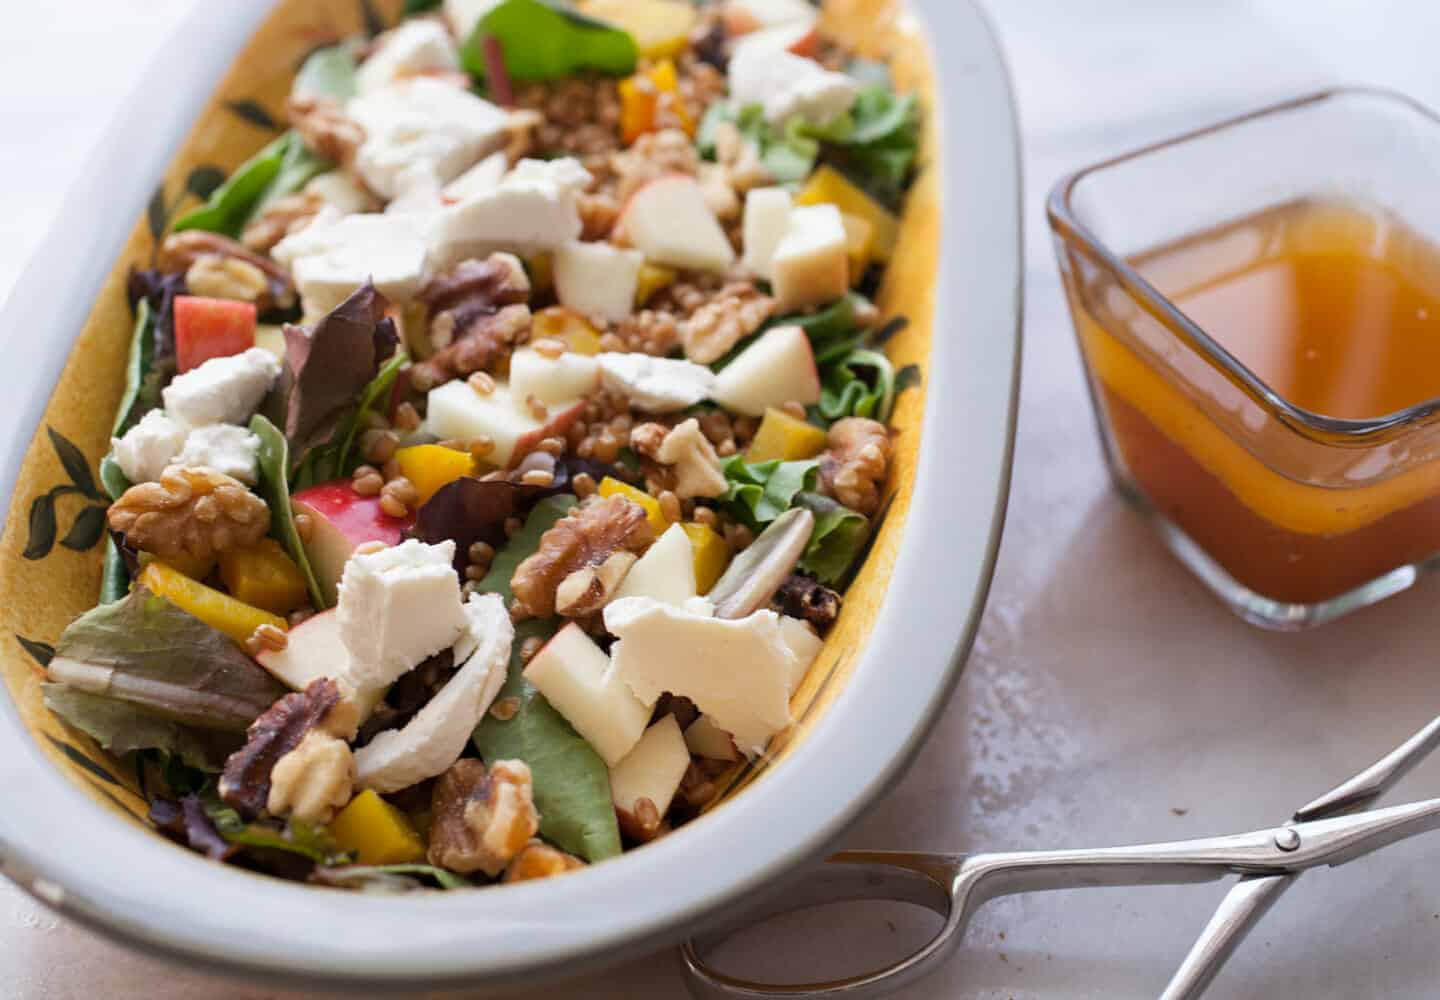 Fall Crunch Salad: This is the kind of salad I love this time of year. It's hearty, has loads of veggies and textures, plus creamy goat cheese and a tangy apple dressing. For a bonus, you can top it with an egg! | macheesmo.com